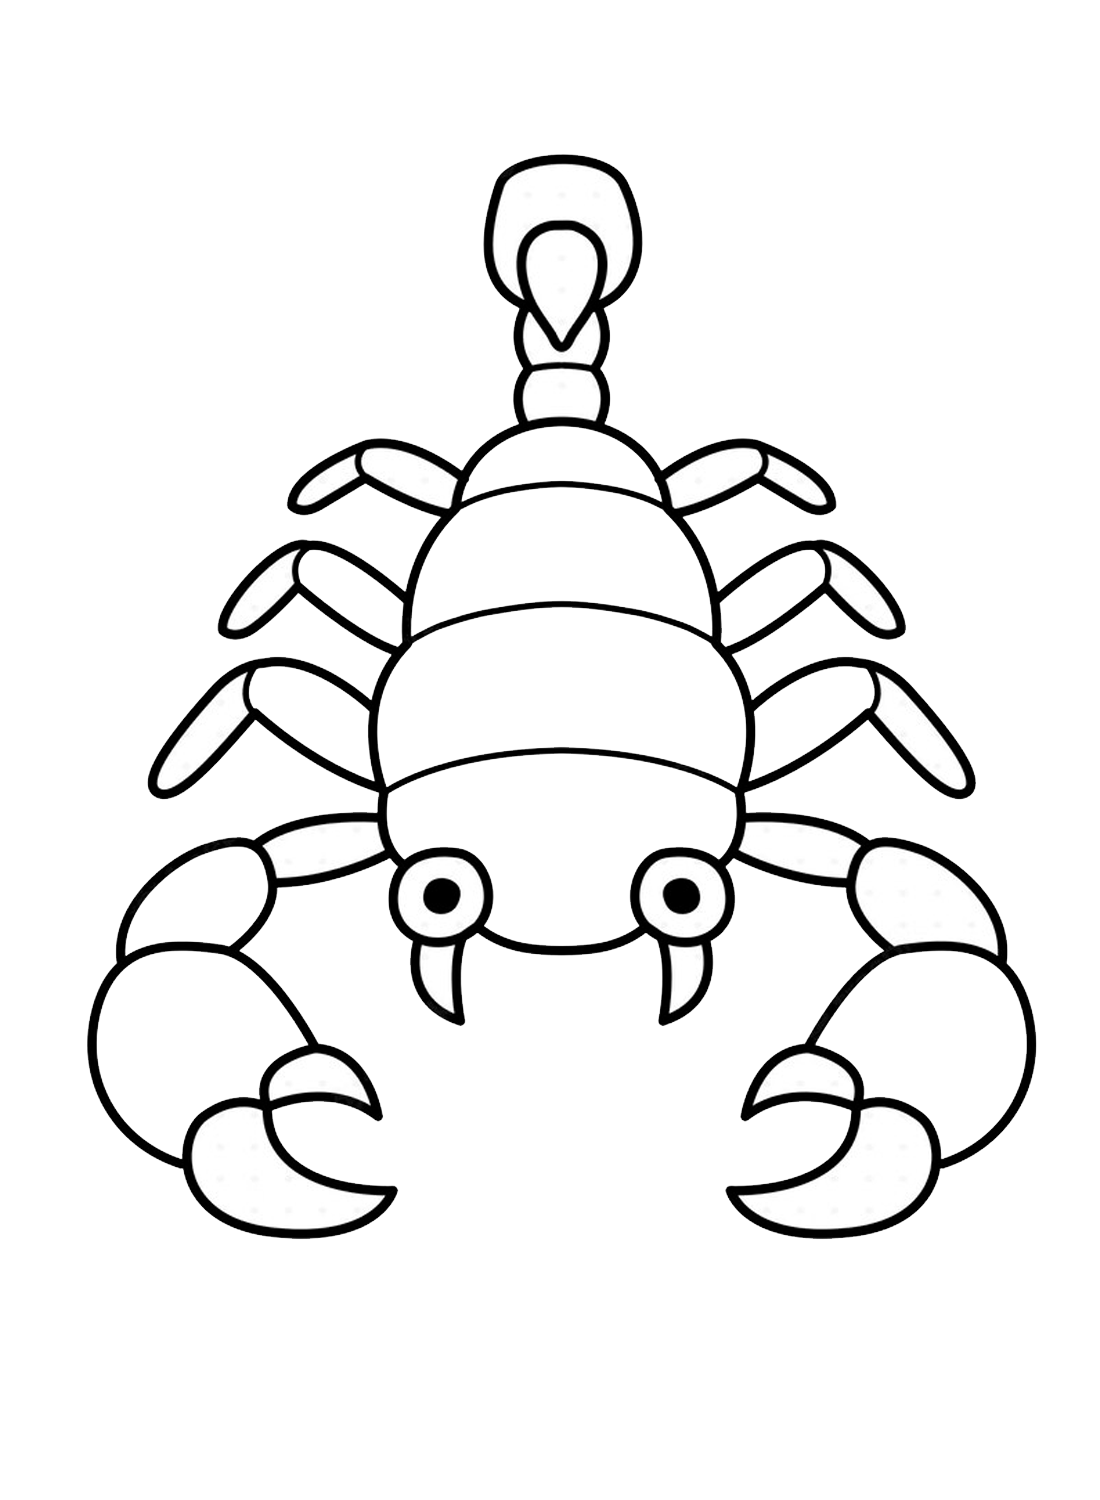 Scorpion Coloring Page - Free Printable Coloring Pages